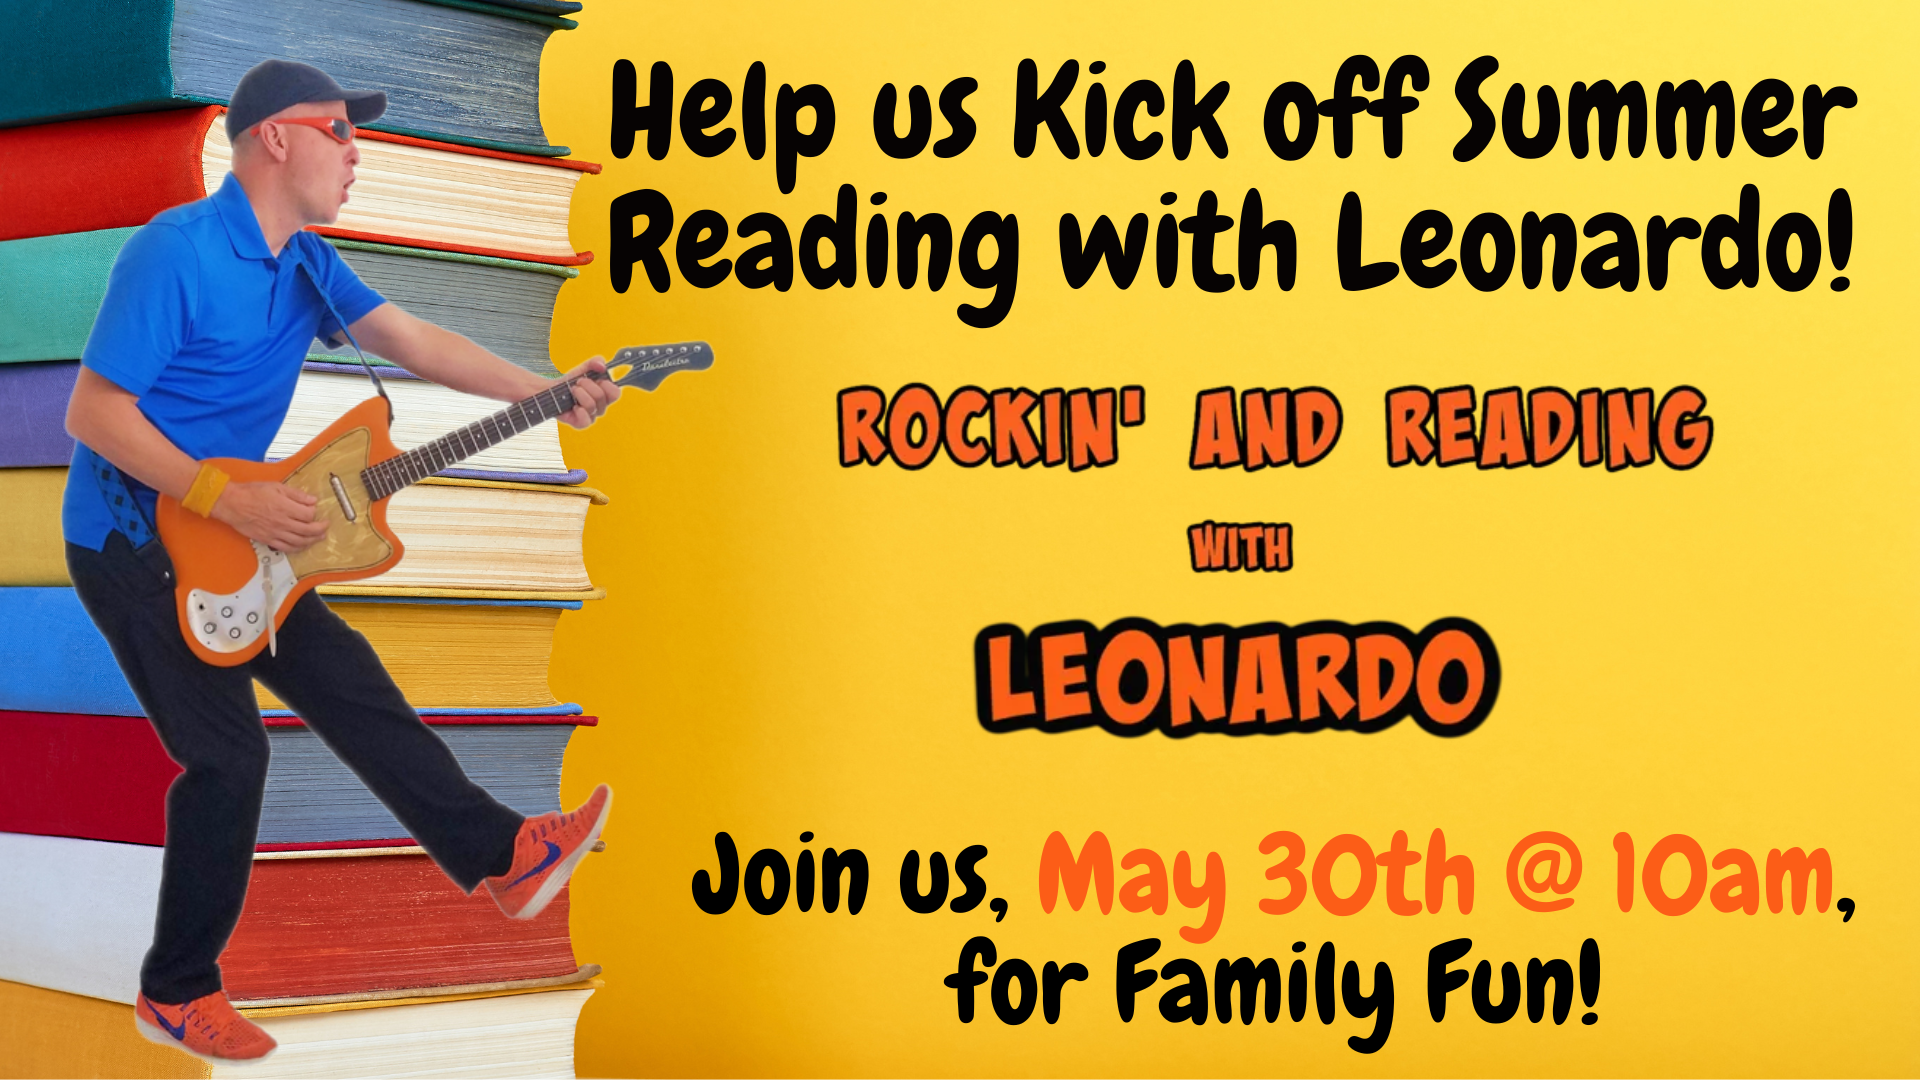 Help us kick off Summer Reading with Leonardo! Music for kids. Thursday, May 30 at 10:00 am